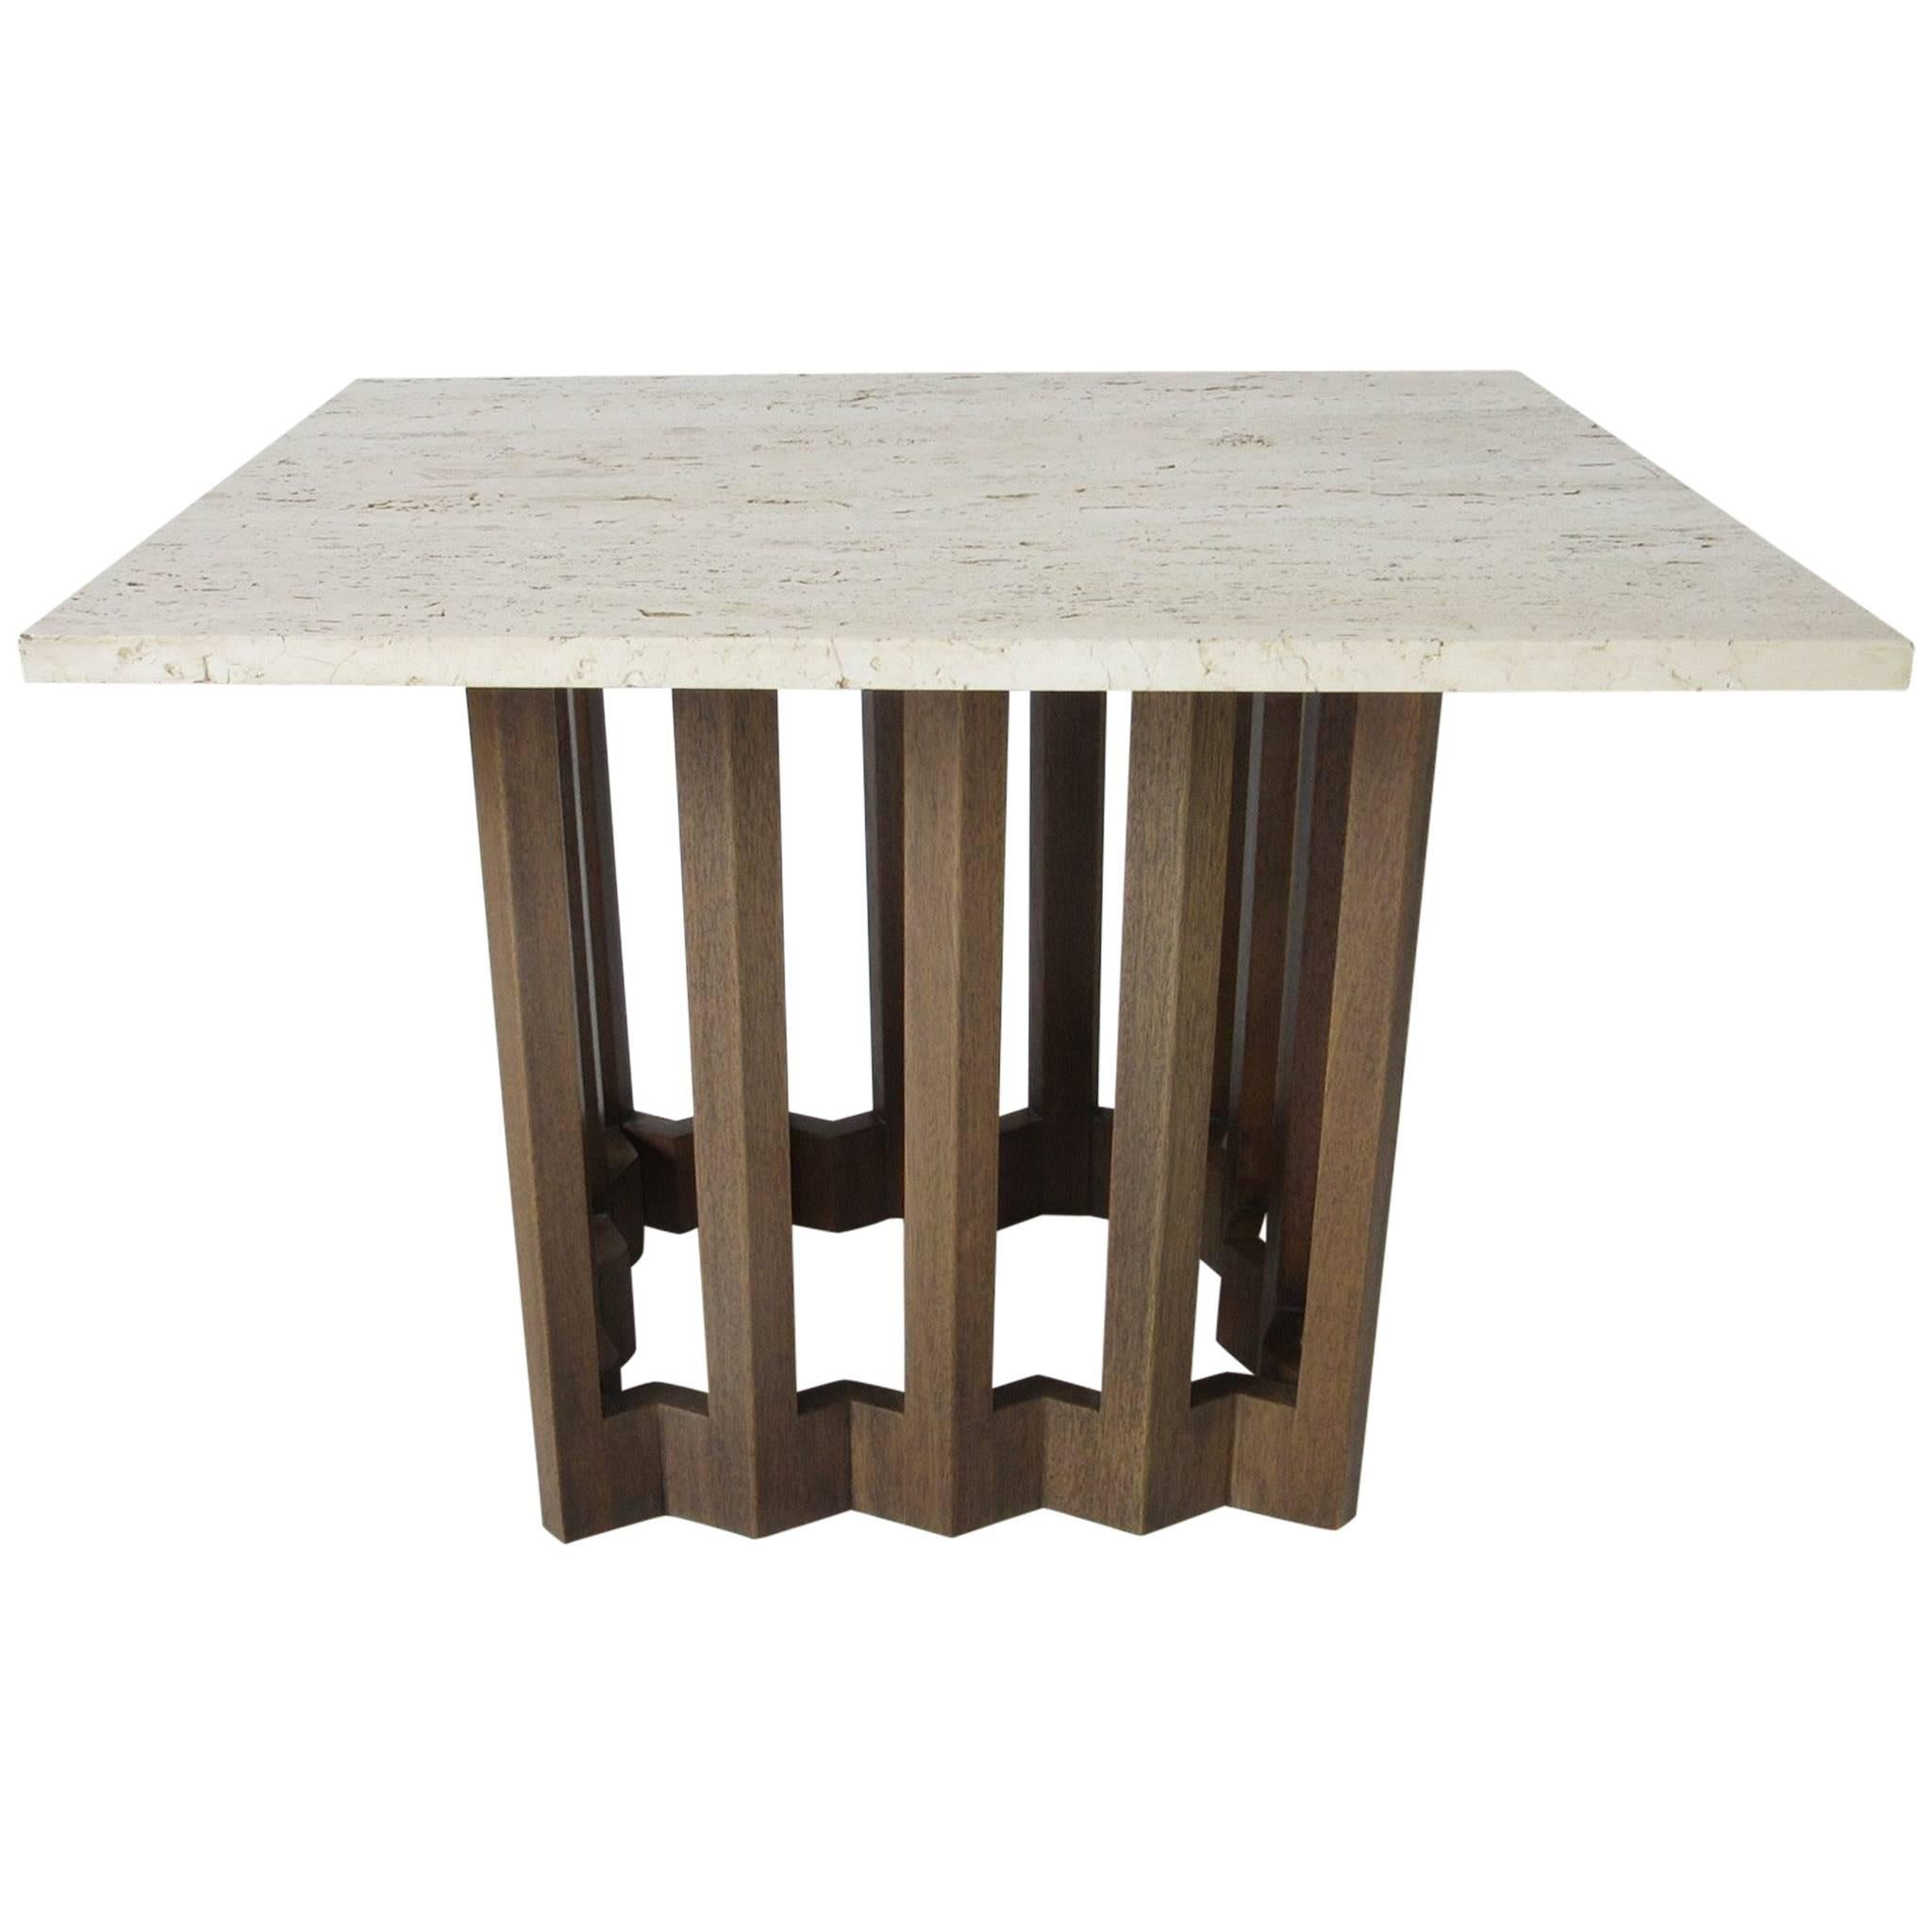 Italian MDC Marble and Sculptural Wood Based Side or End Table